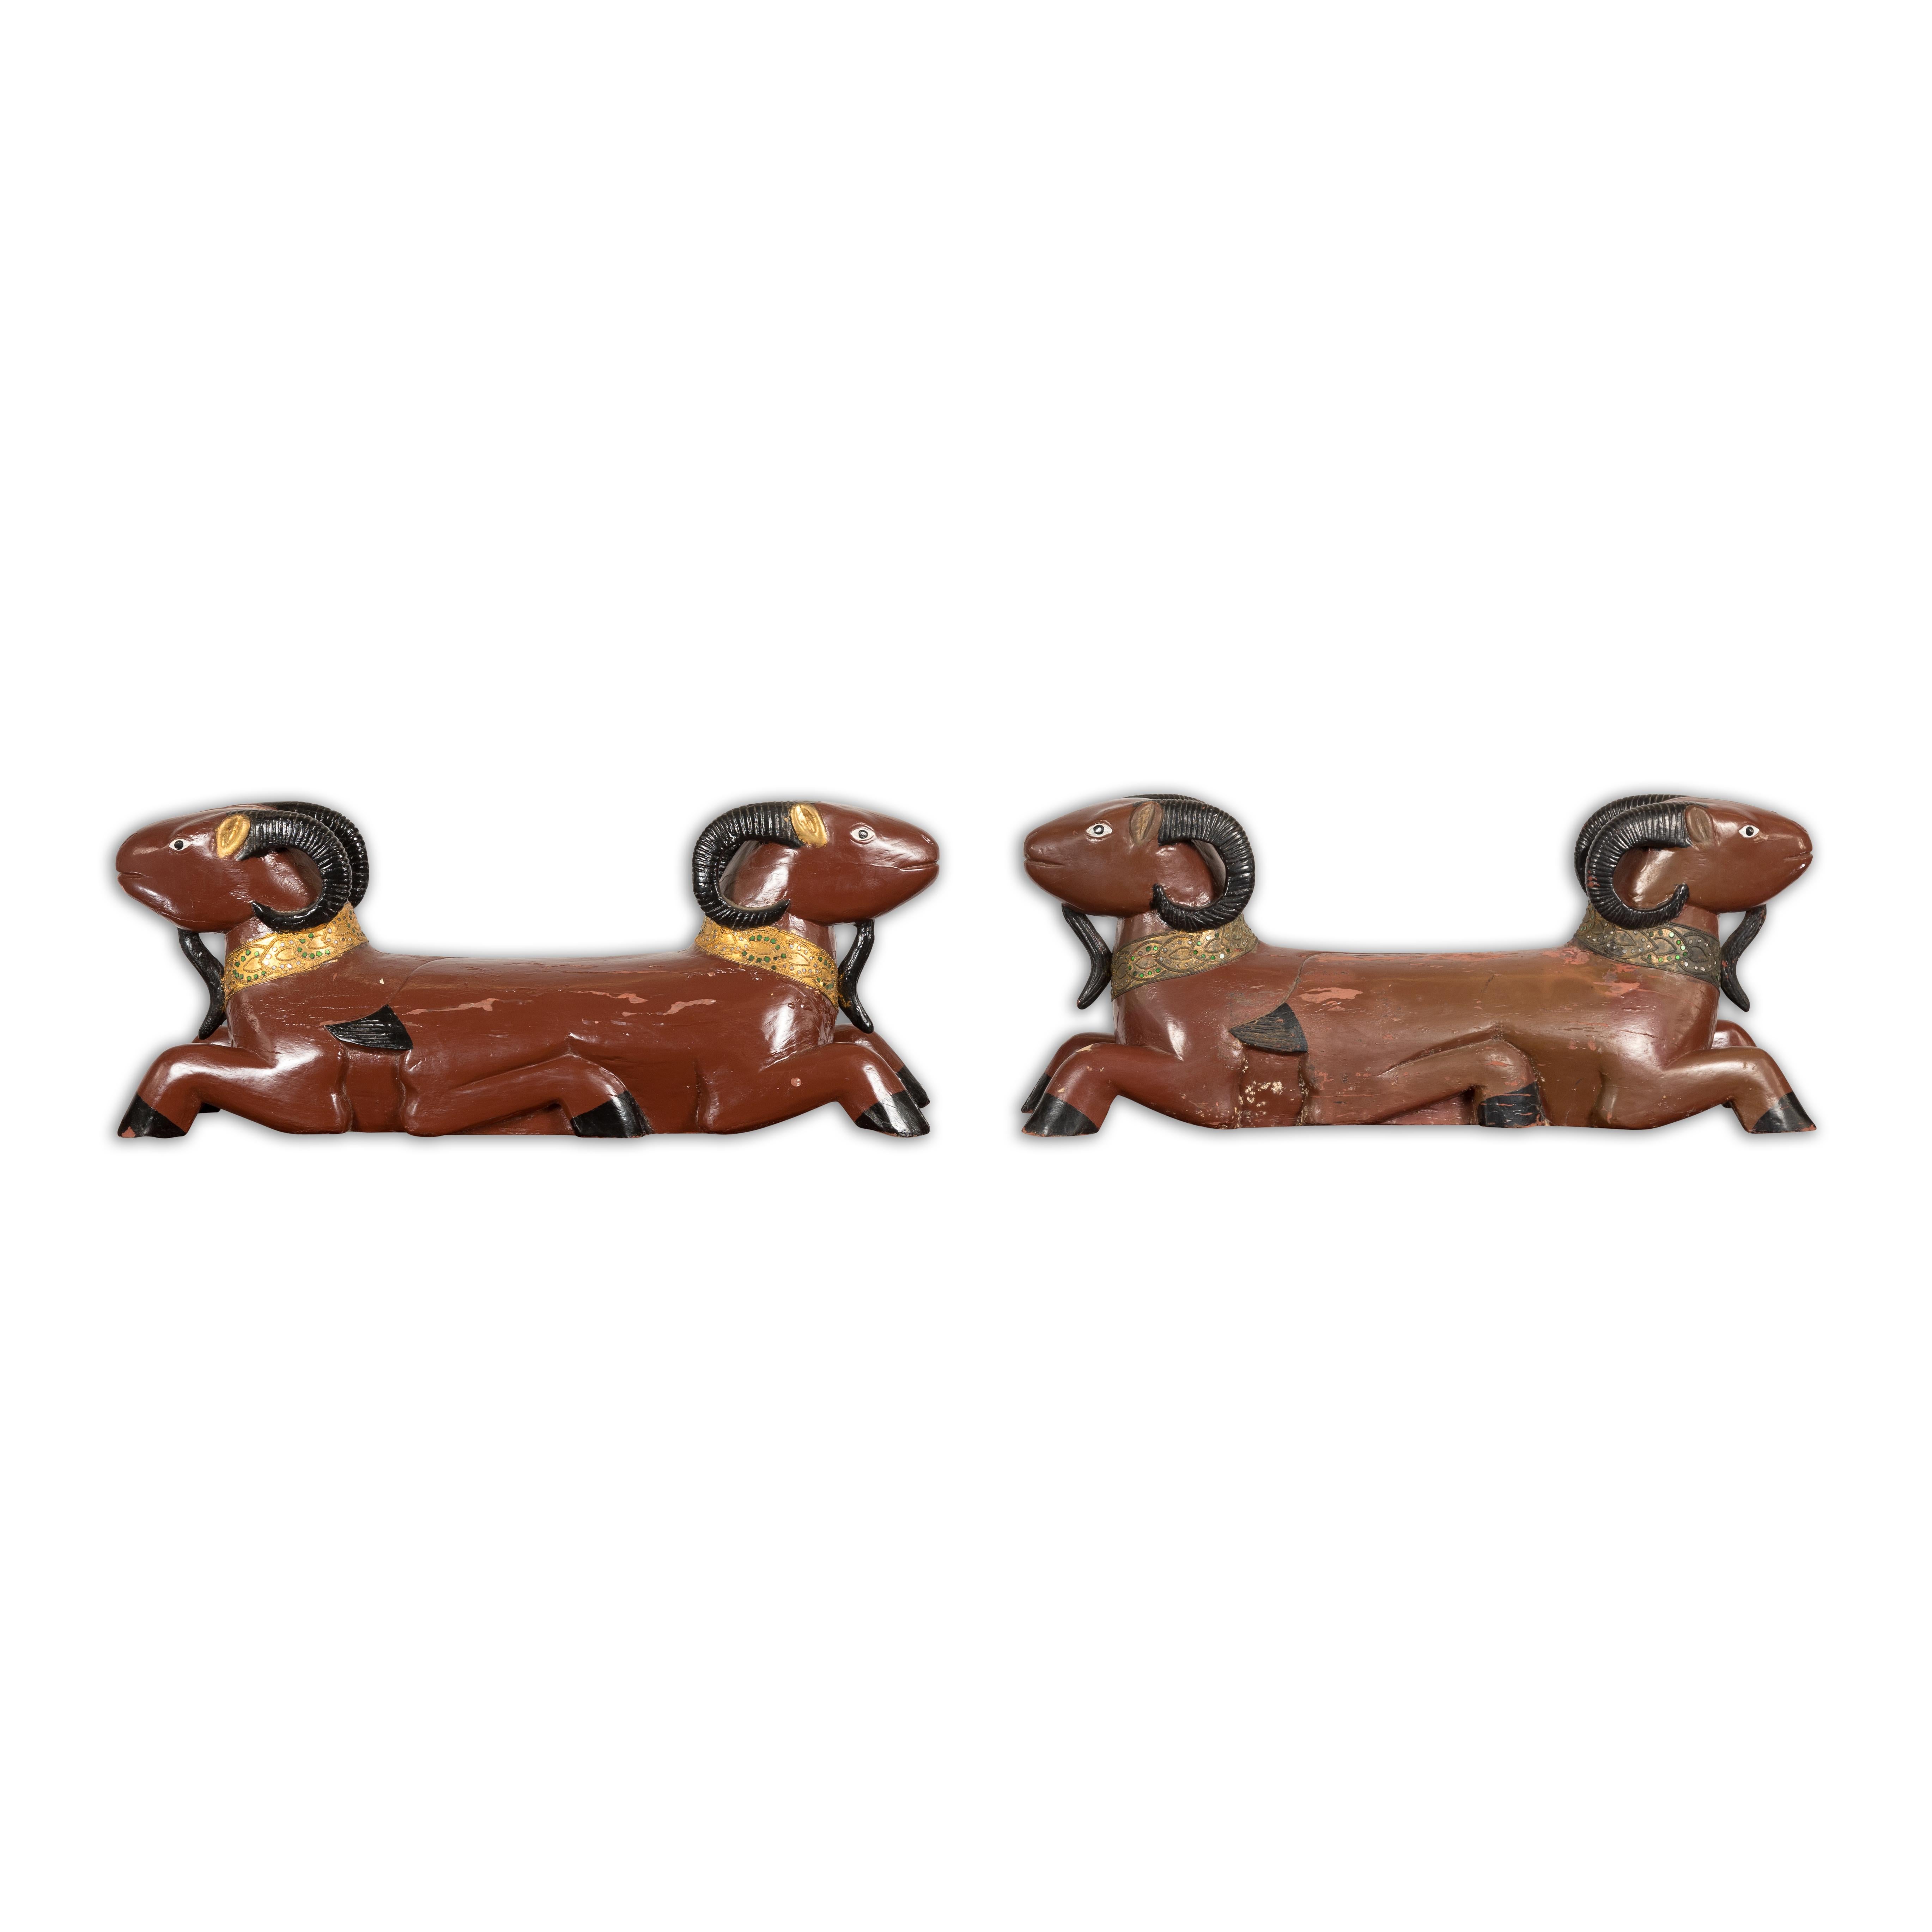 Pair of Vintage Northern Thai Double Ram Sculptures with Reddish Brown Lacquer For Sale 12